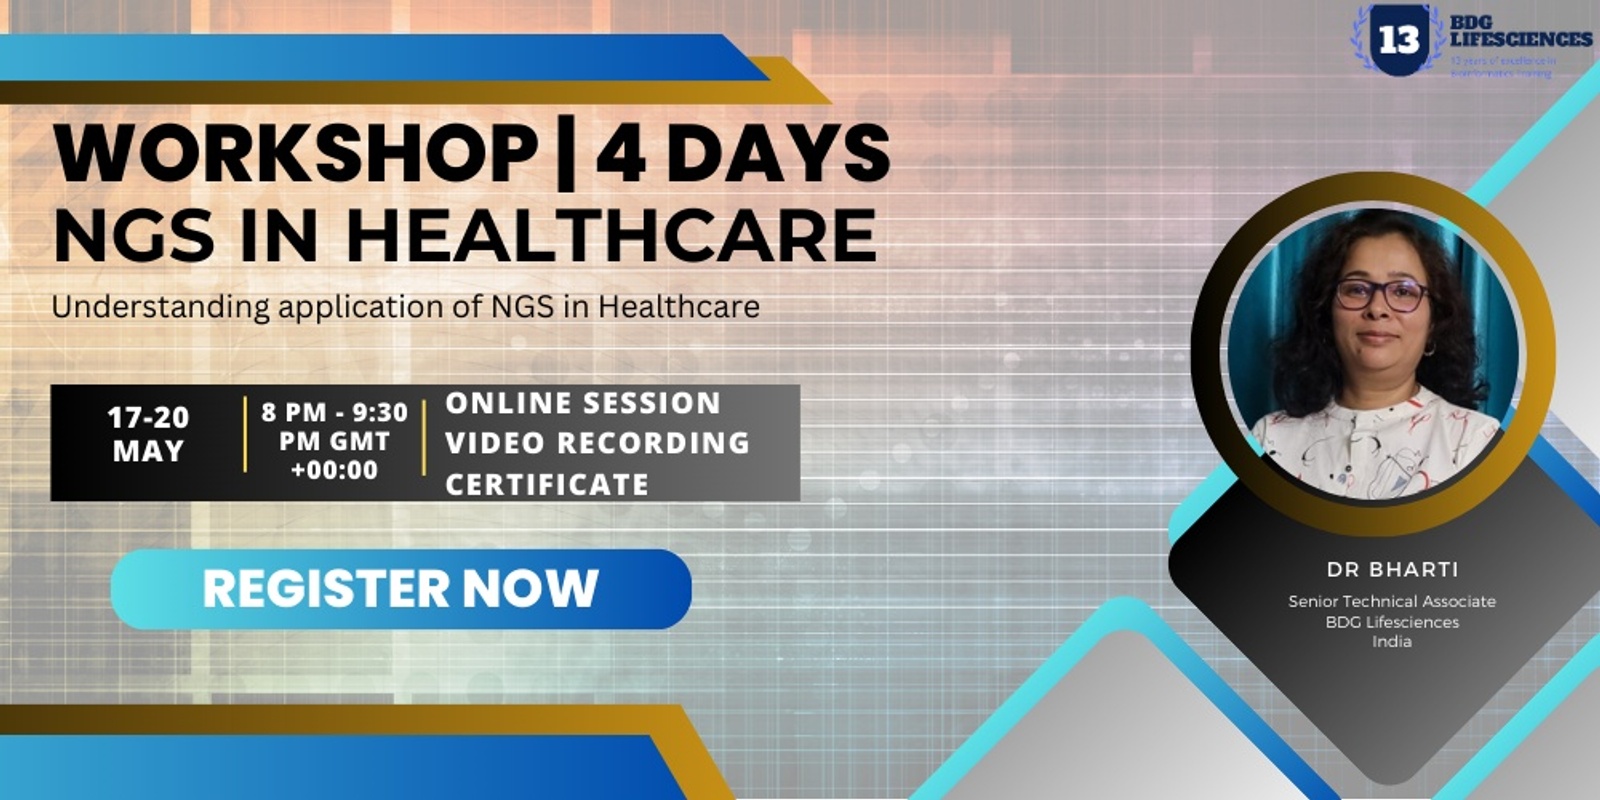 Banner image for NGS in Healthcare Online Training